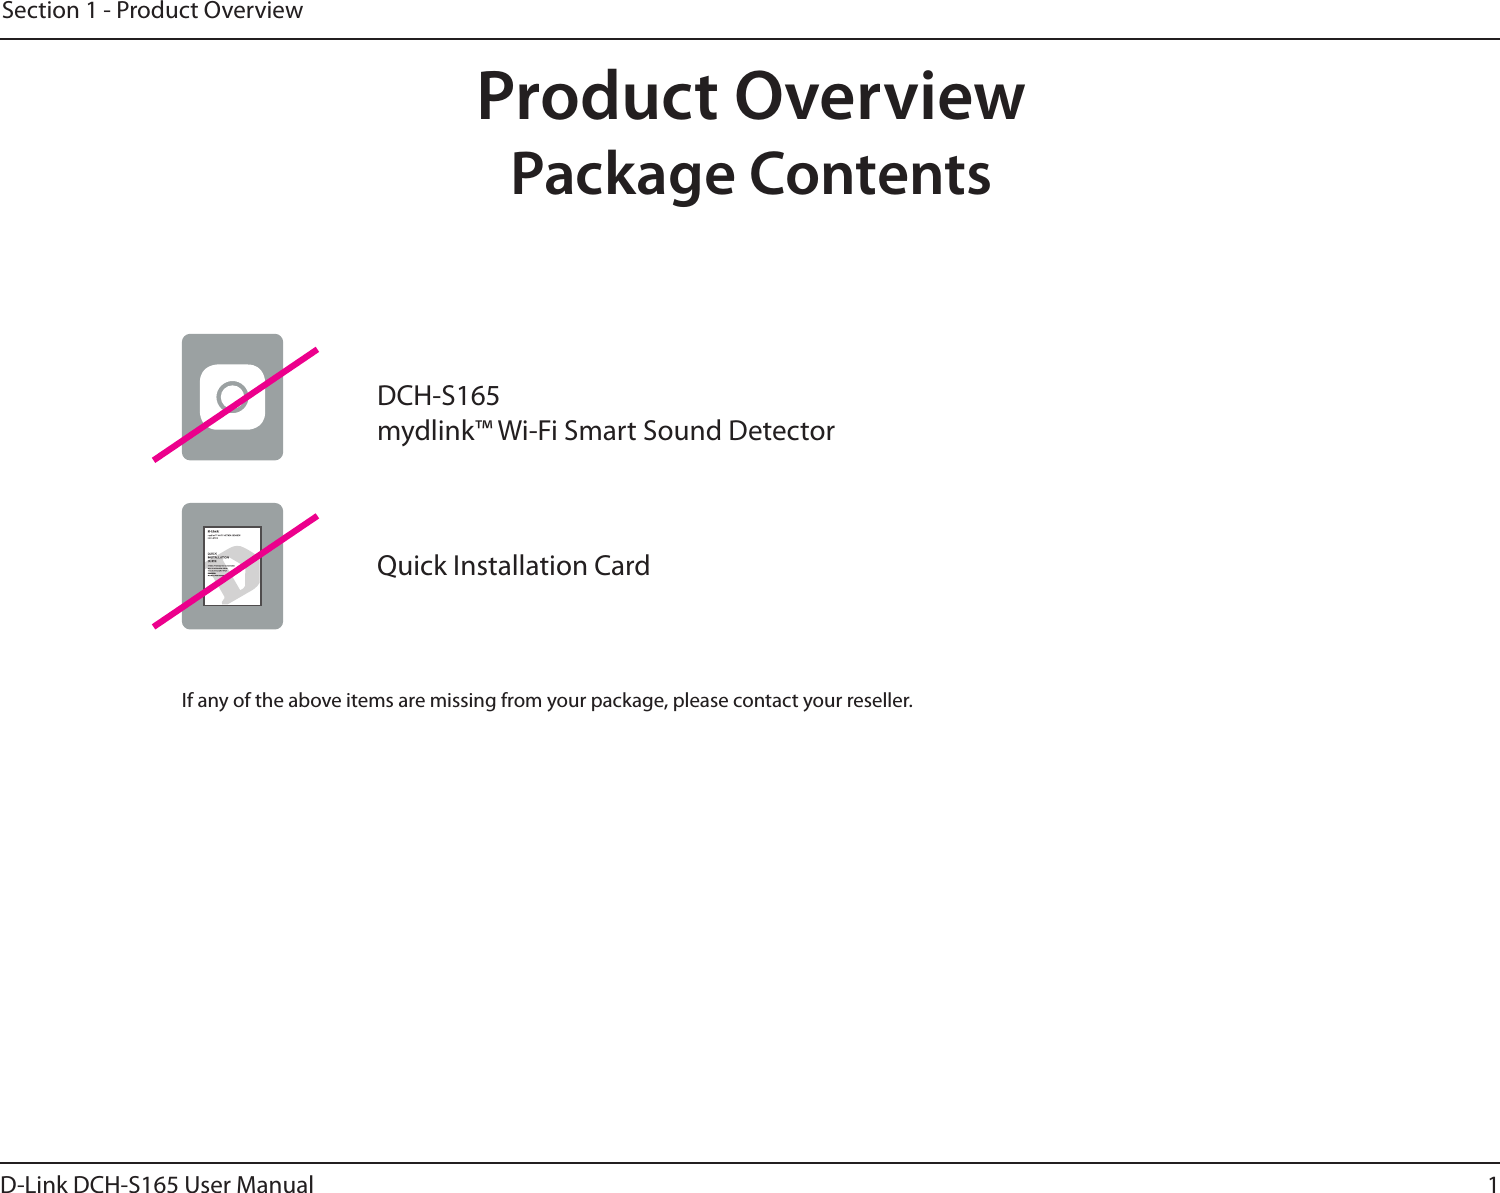 1D-Link DCH-S165 User ManualSection 1 - Product OverviewProduct OverviewPackage ContentsIf any of the above items are missing from your package, please contact your reseller.Quick Installation CardDCH-S165 mydlink™ Wi-Fi Smart Sound Detector